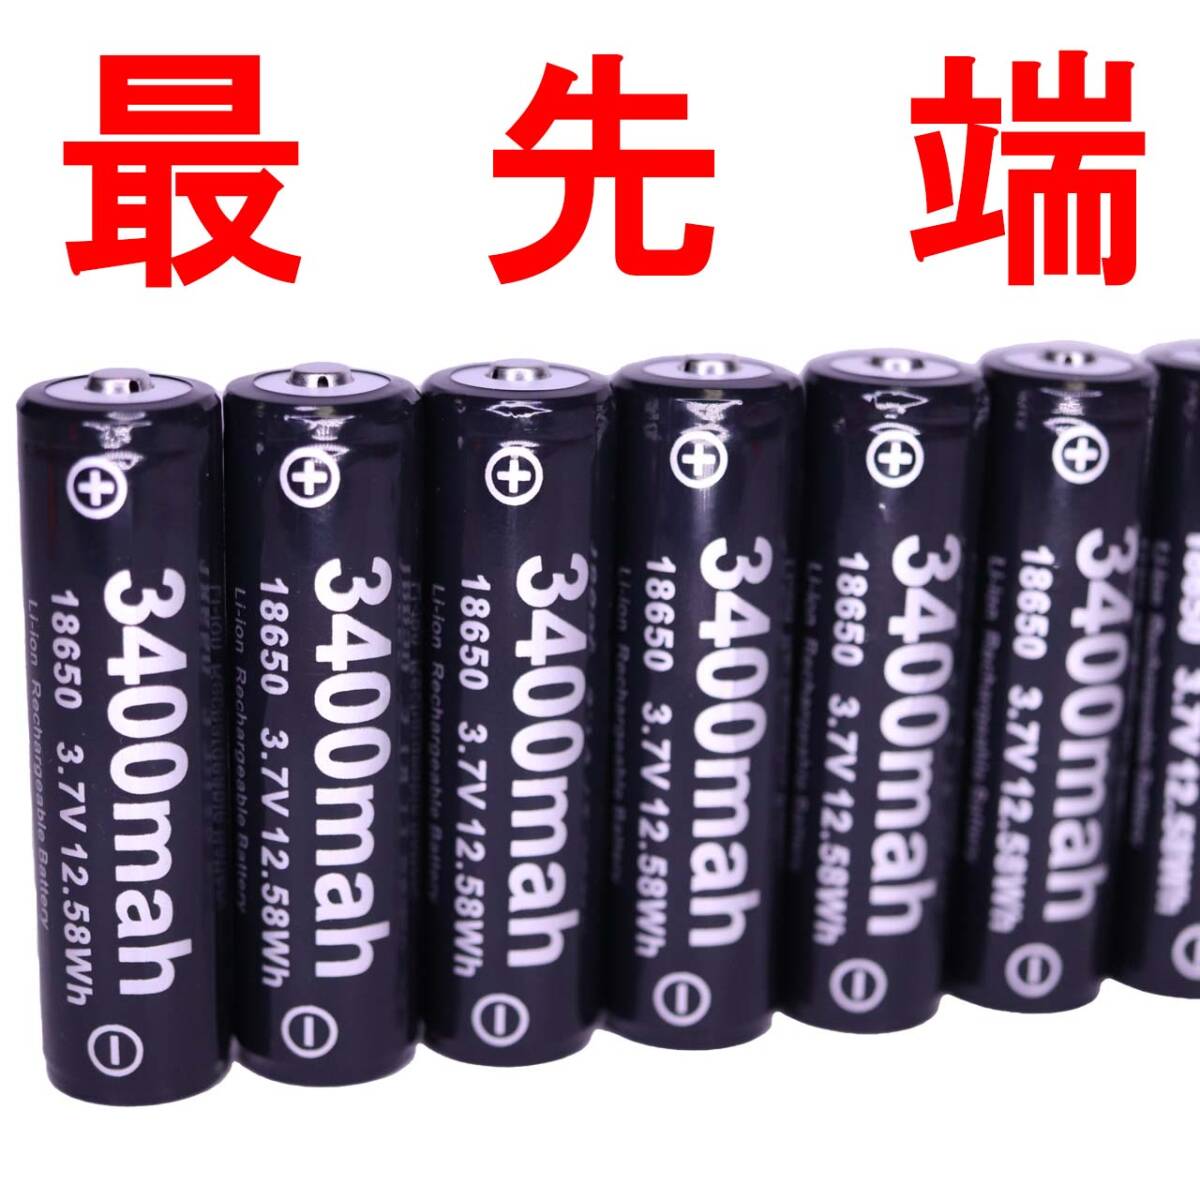 18650 lithium ion rechargeable battery battery PSE protection circuit flashlight head light handy light 3400mah 04